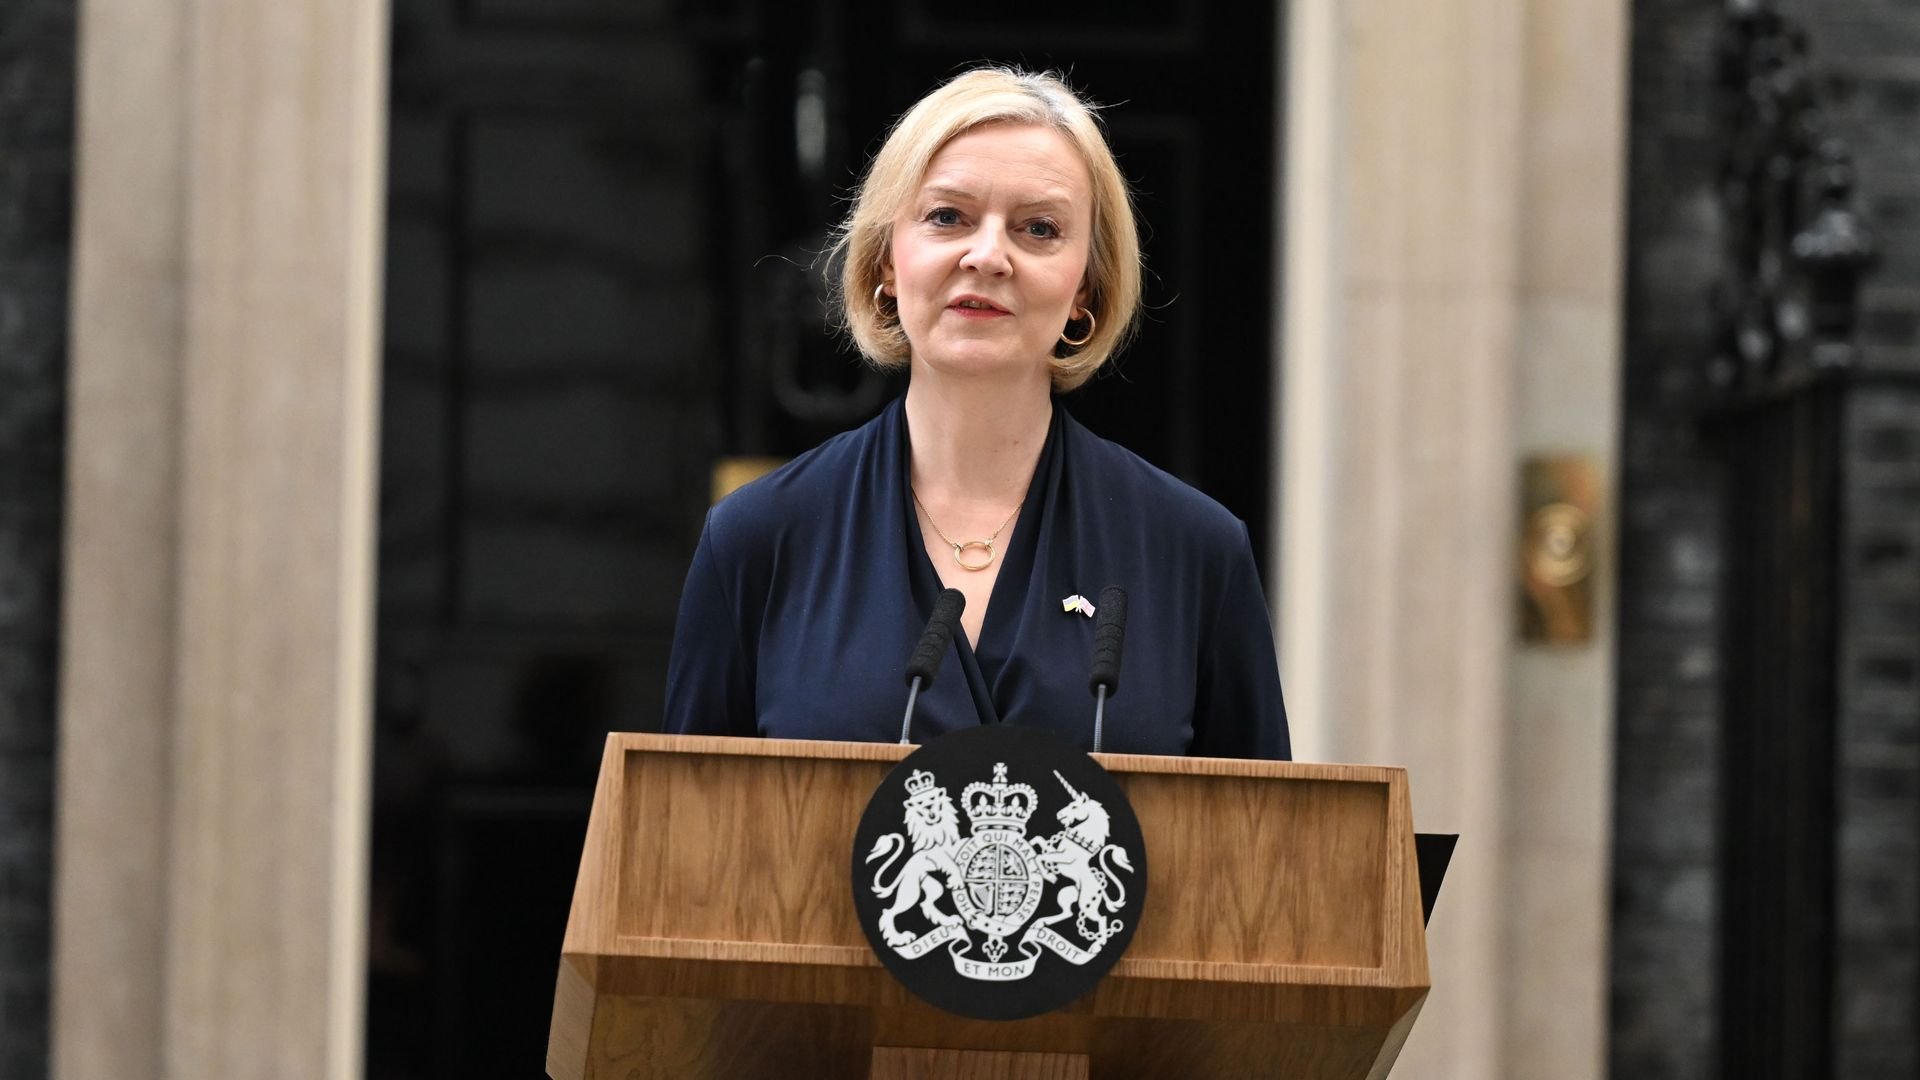 "Stability is very important": World leaders react to Truss' resignation